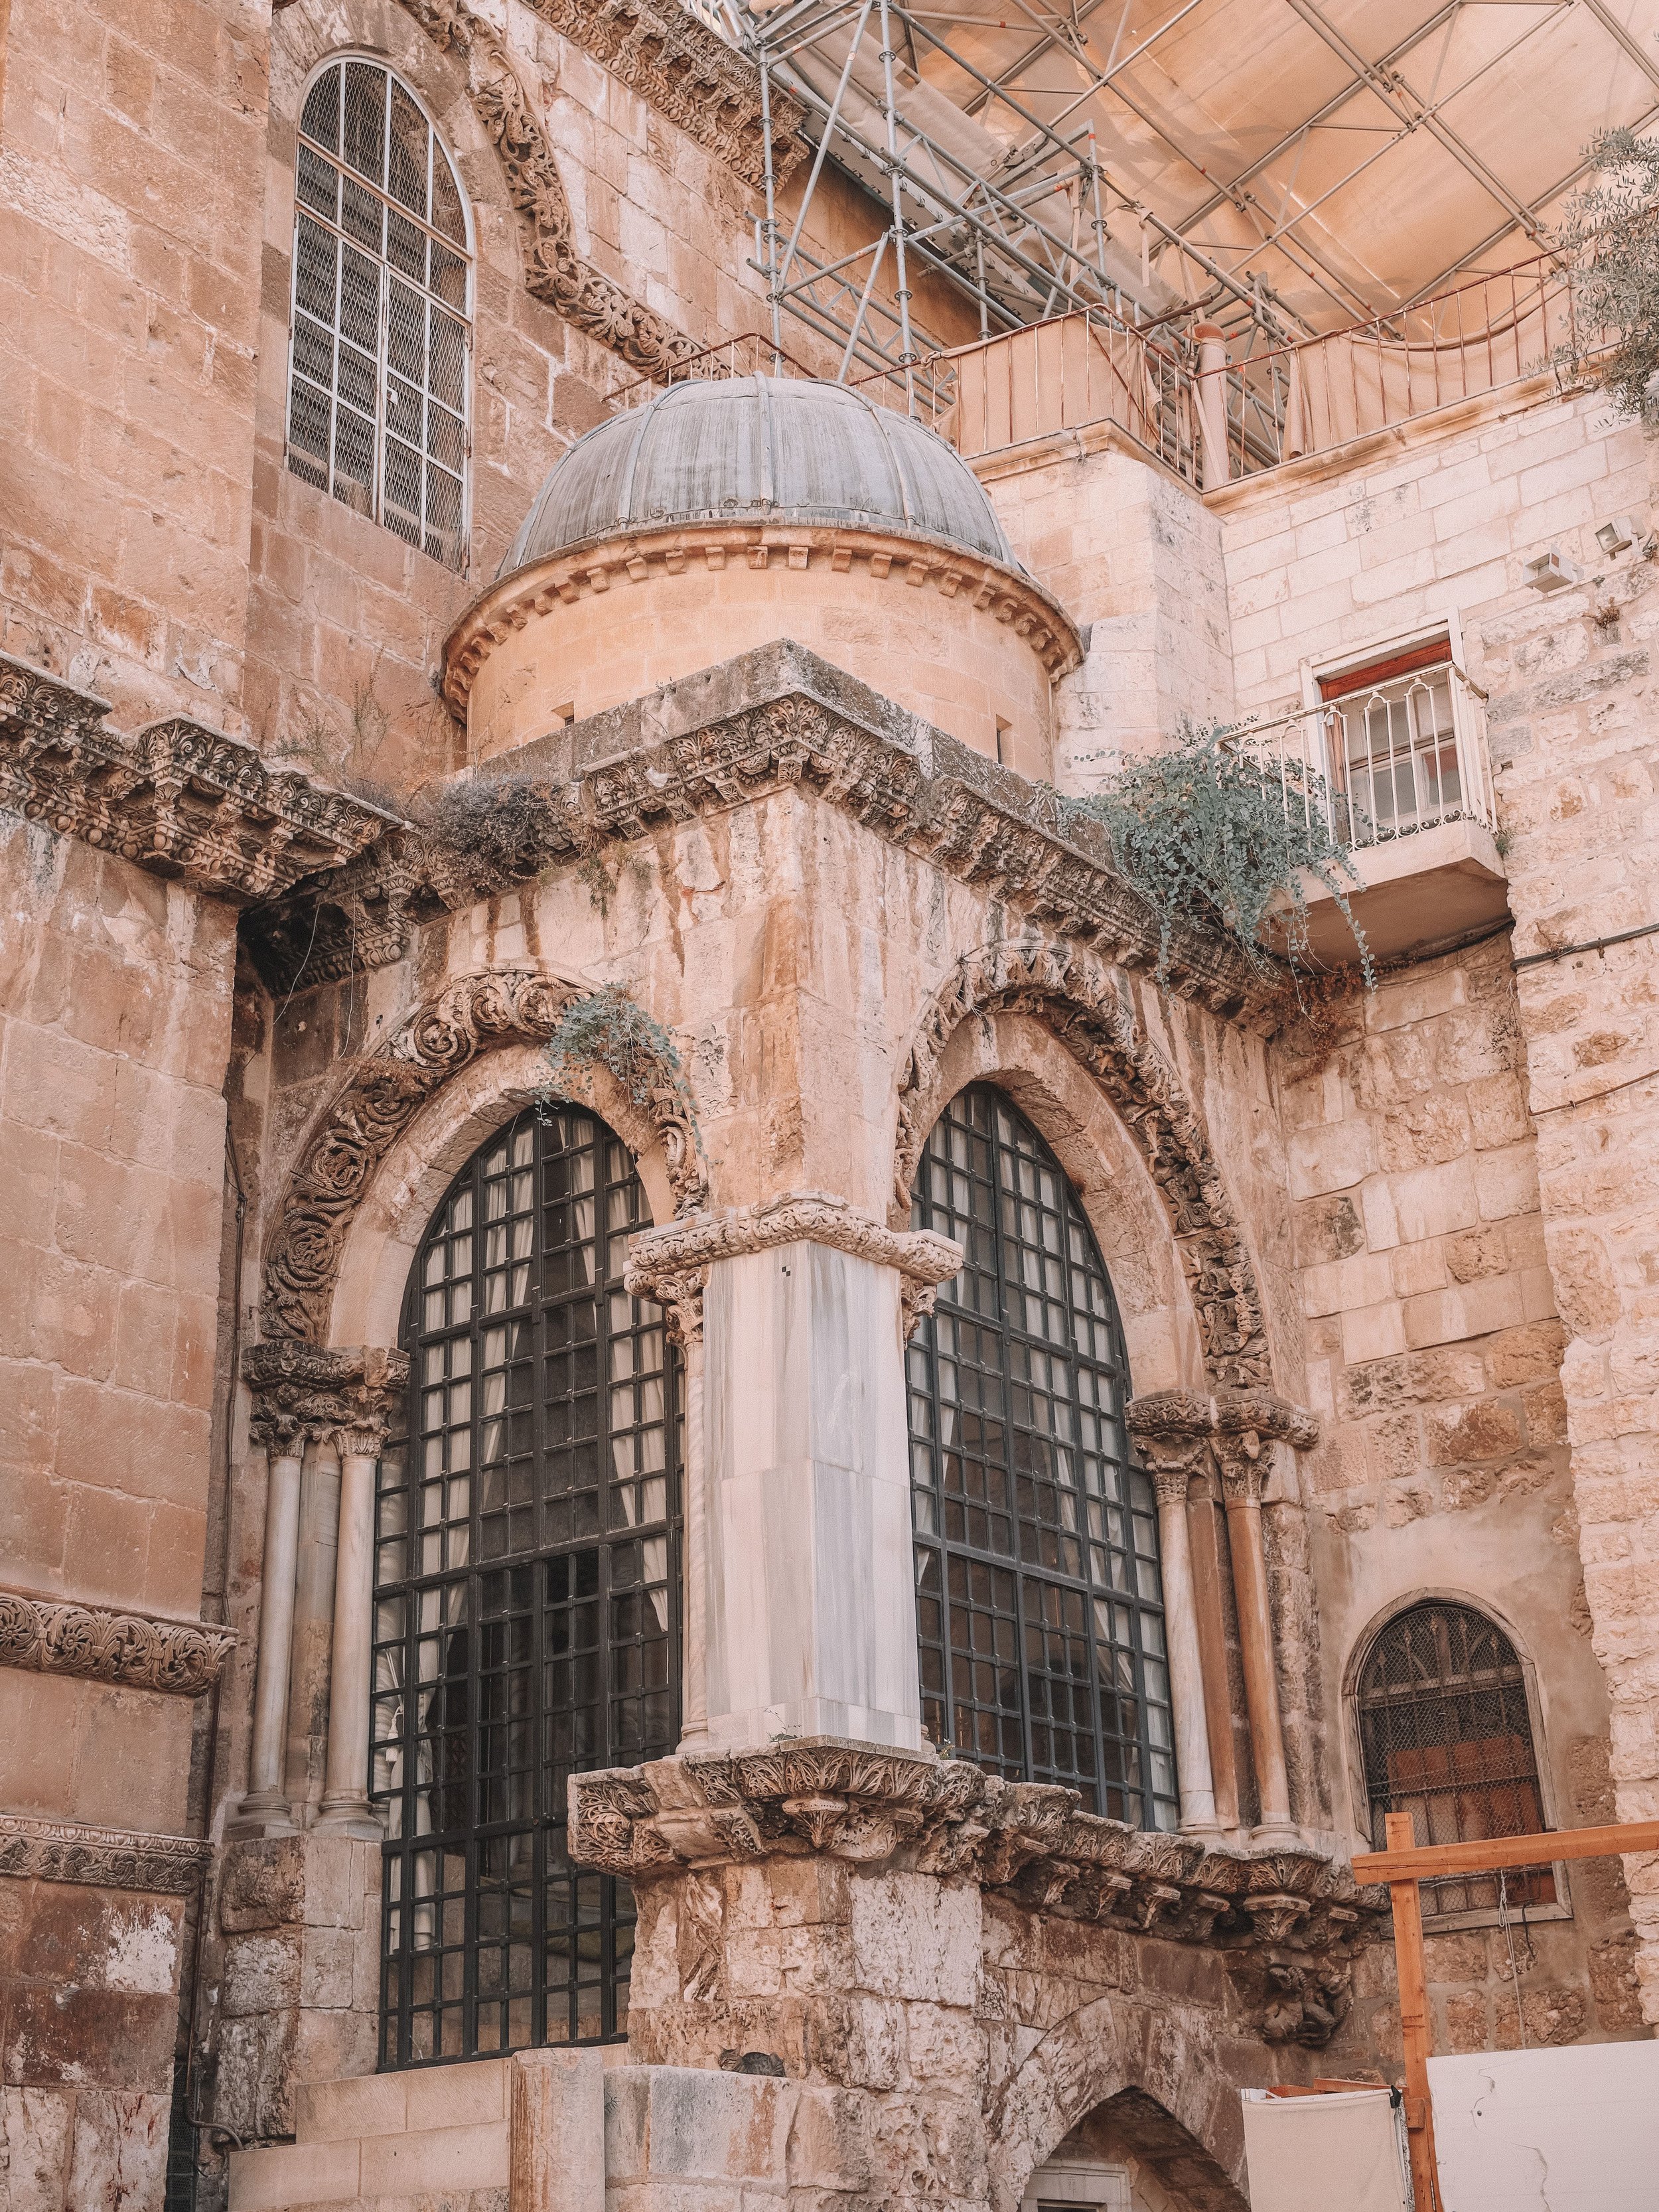 Entrance of the Church of the Holy Sepulchre - Old Town - Jerusalem - Israel